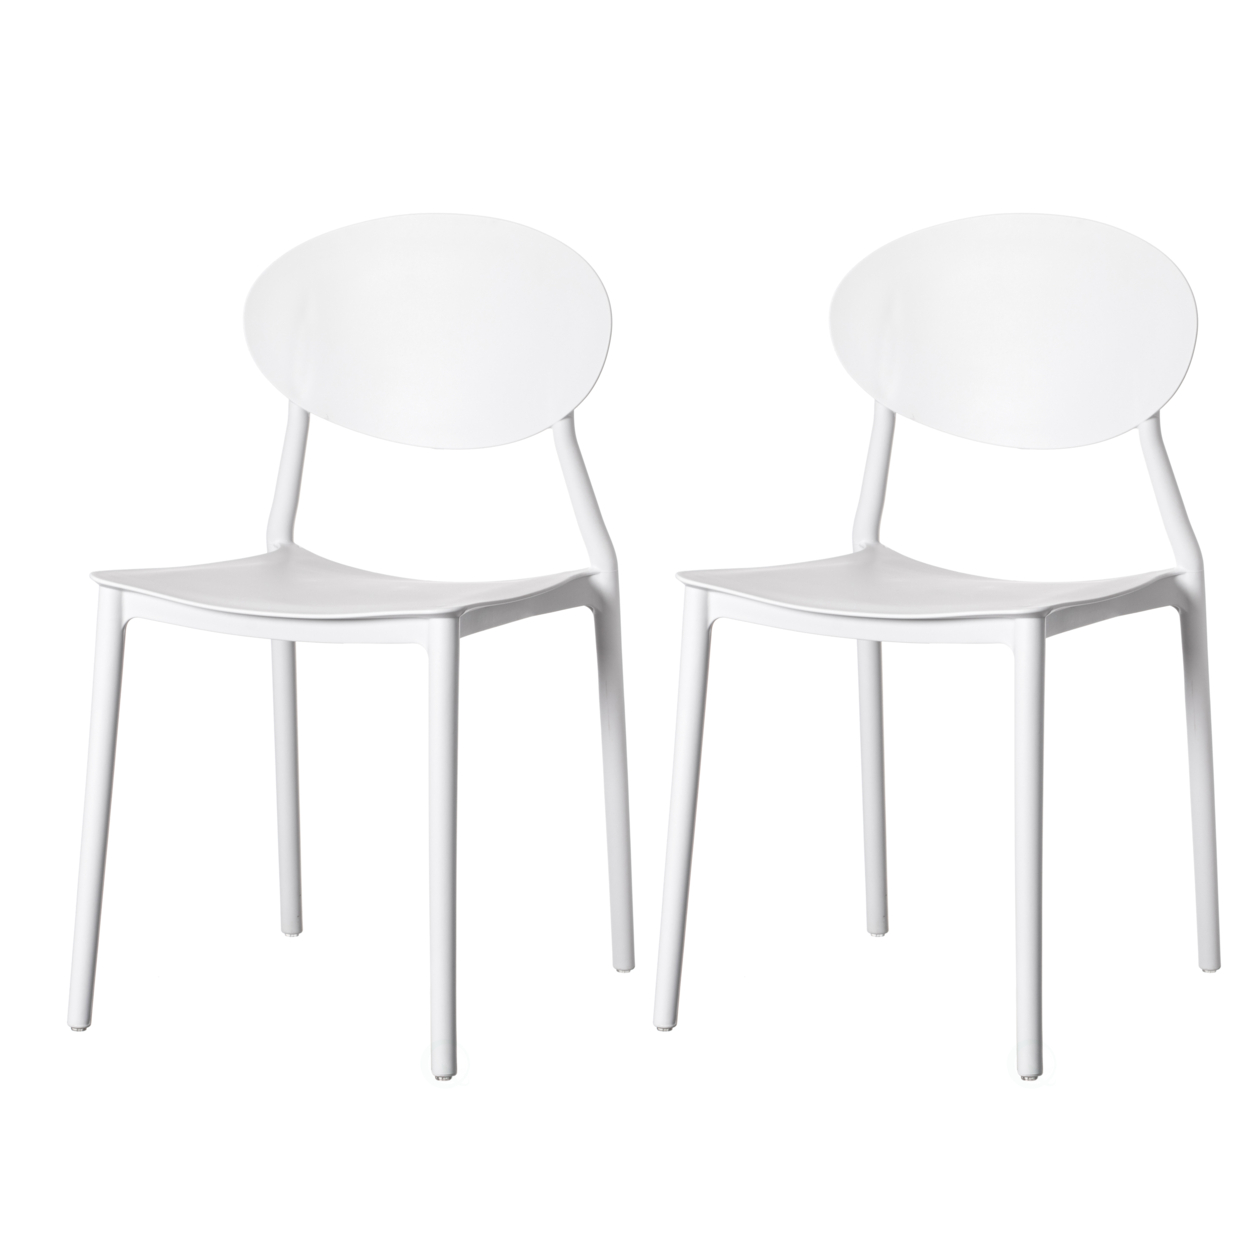 Modern Plastic Outdoor Dining Chair With Open Oval Back Design - Set Of 2 White